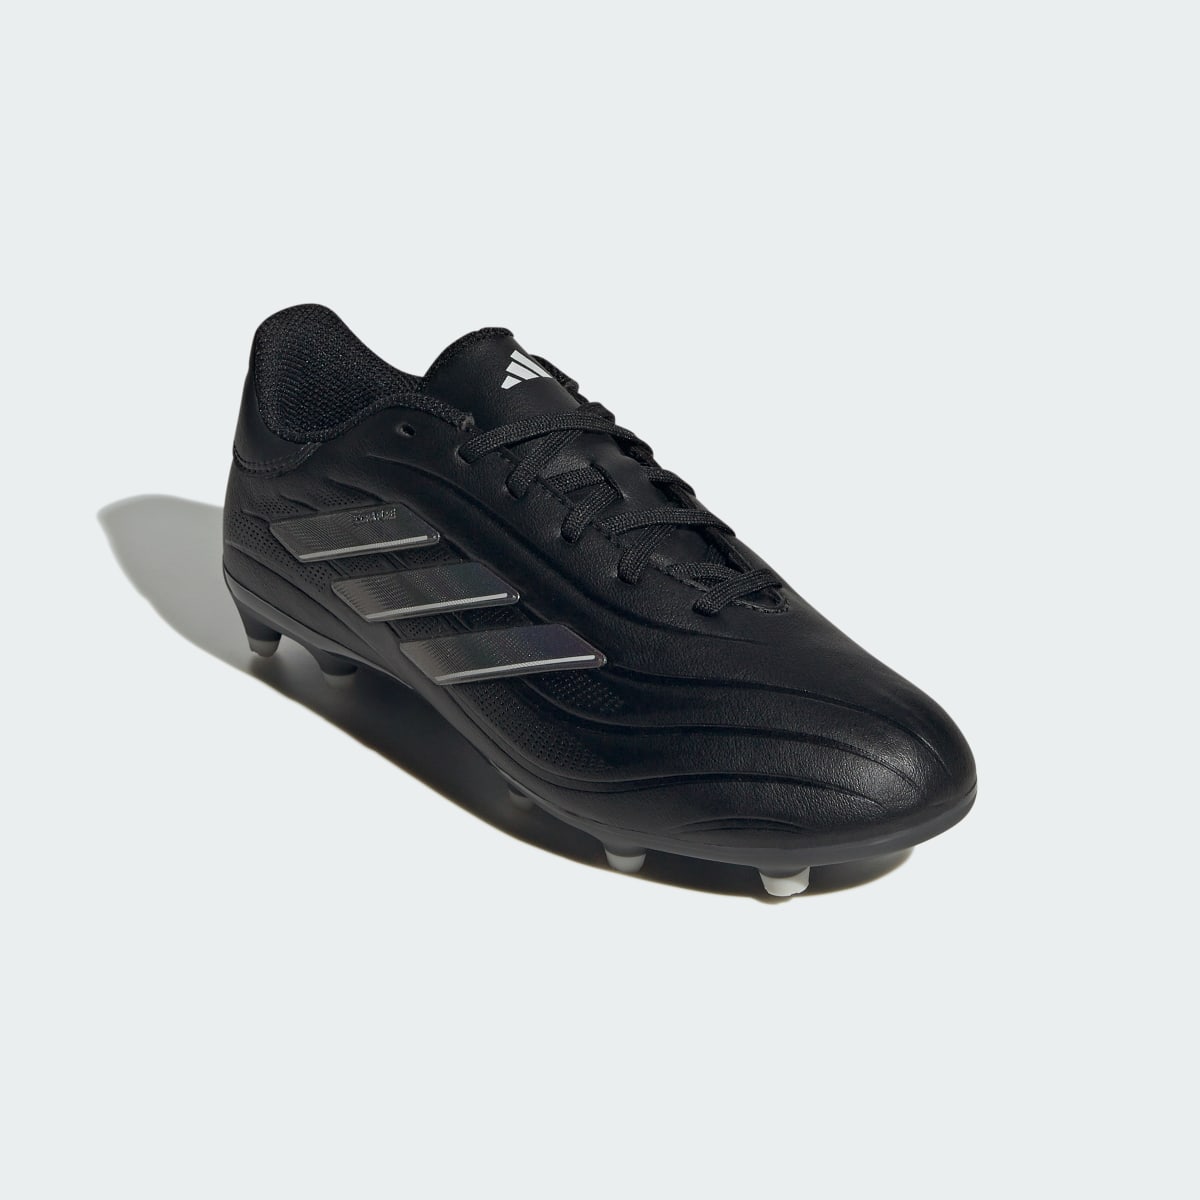 Adidas Copa Pure II League Firm Ground Boots. 5